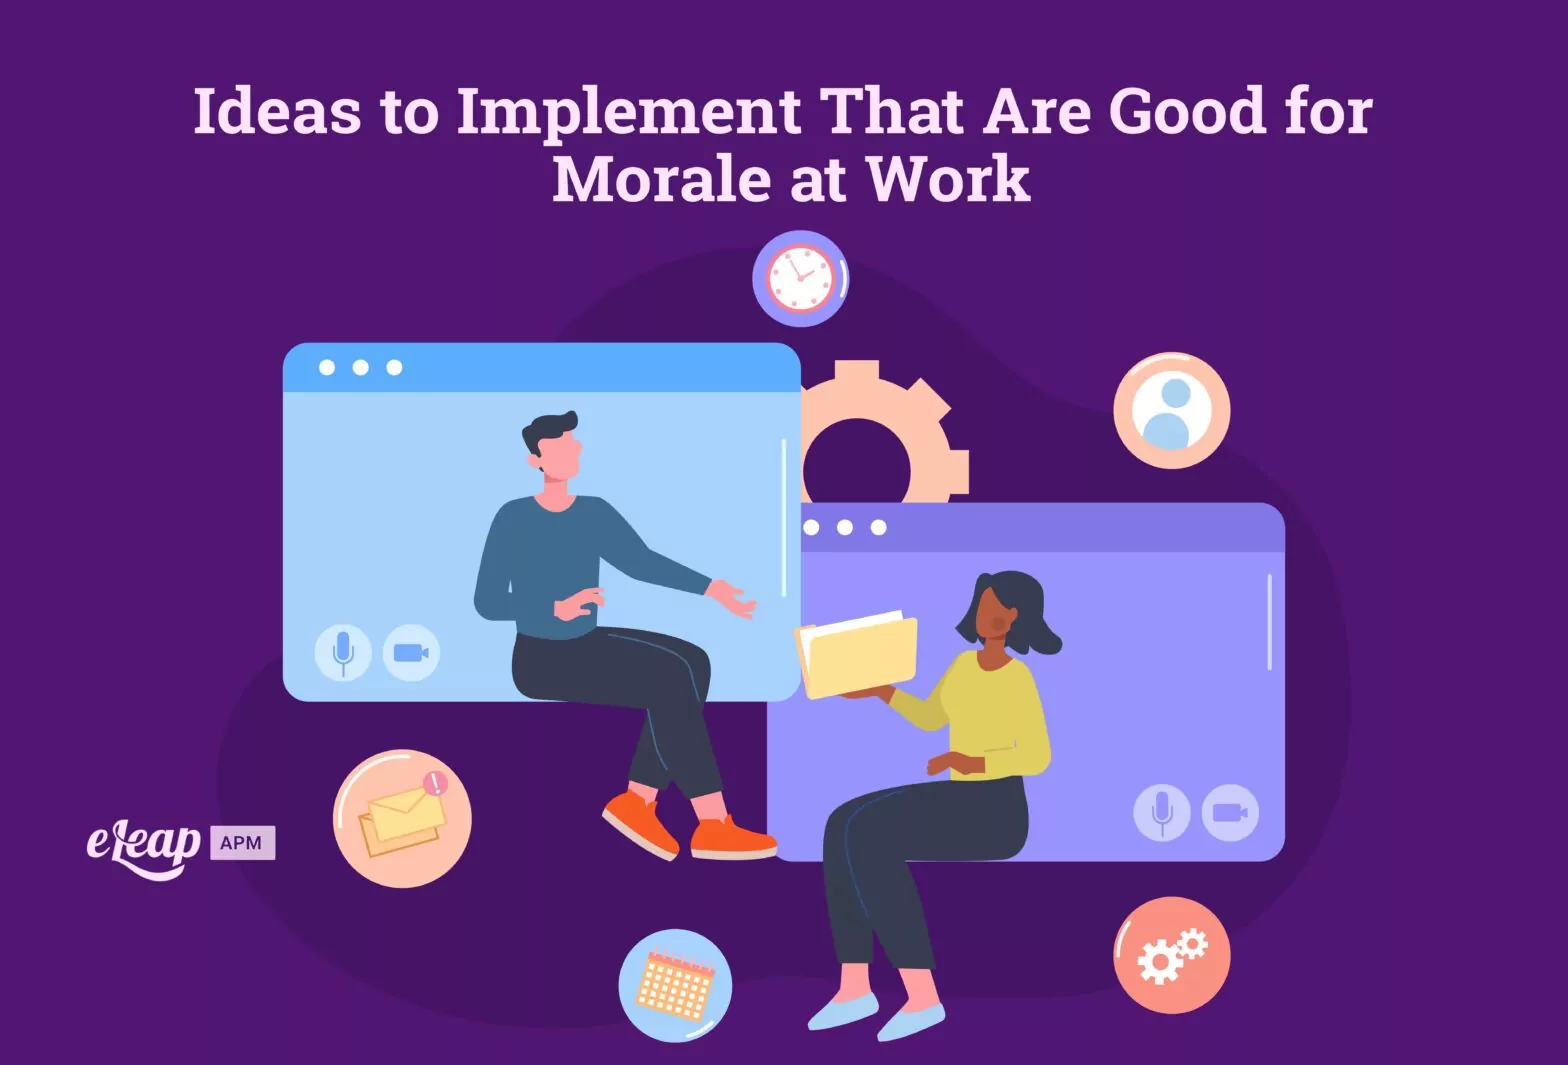 Ideas to Implement That Are Good for Morale at Work